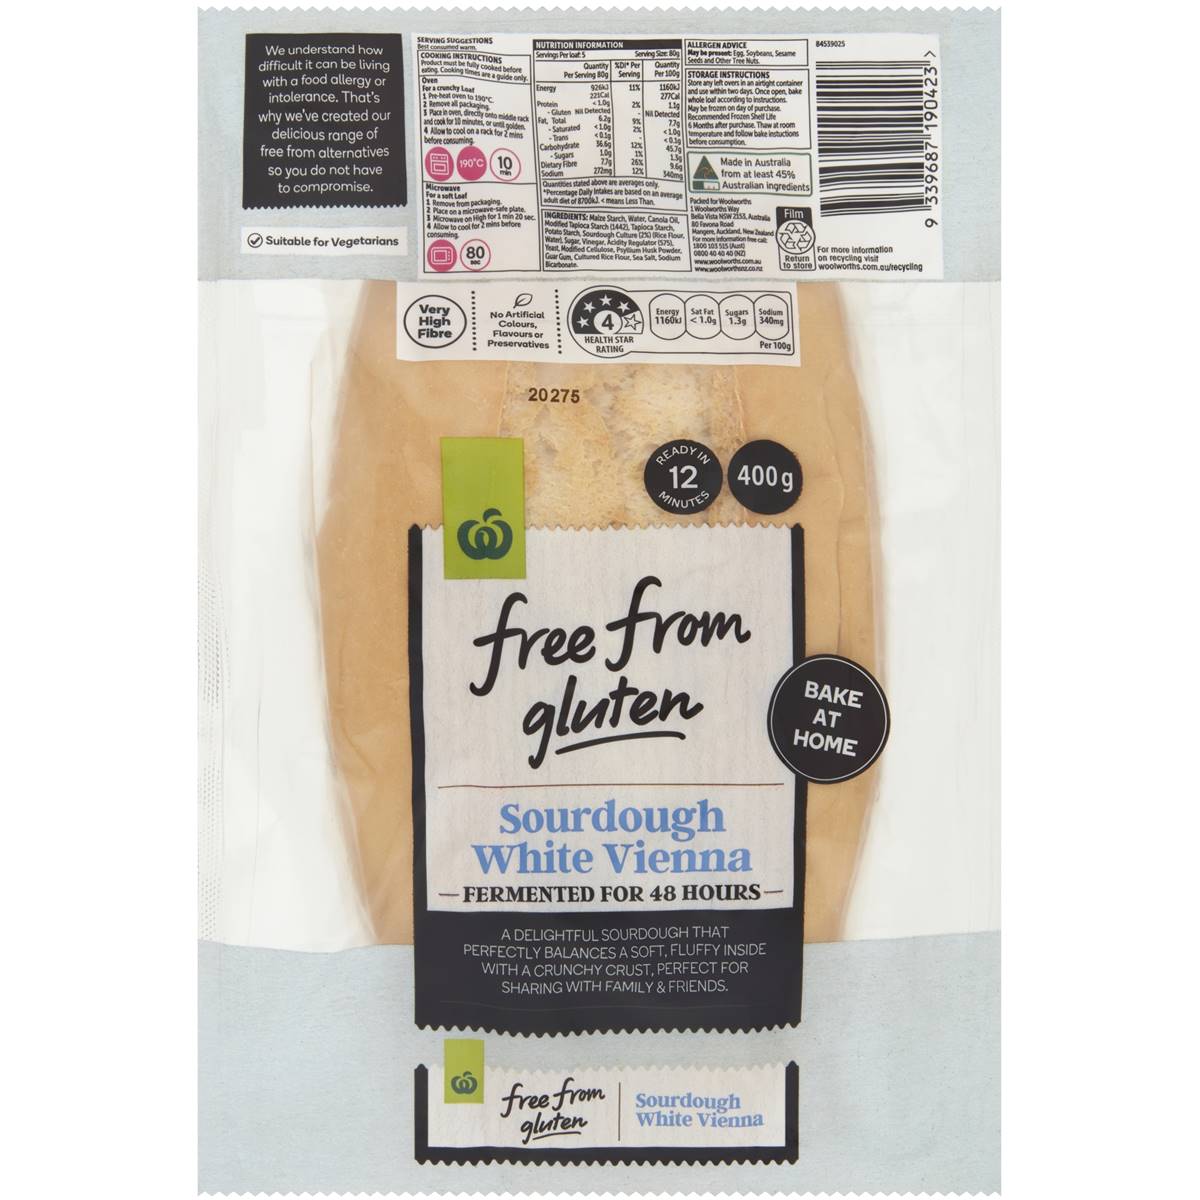 Calories in Woolworths Free From Gluten Sourdough White Vienna